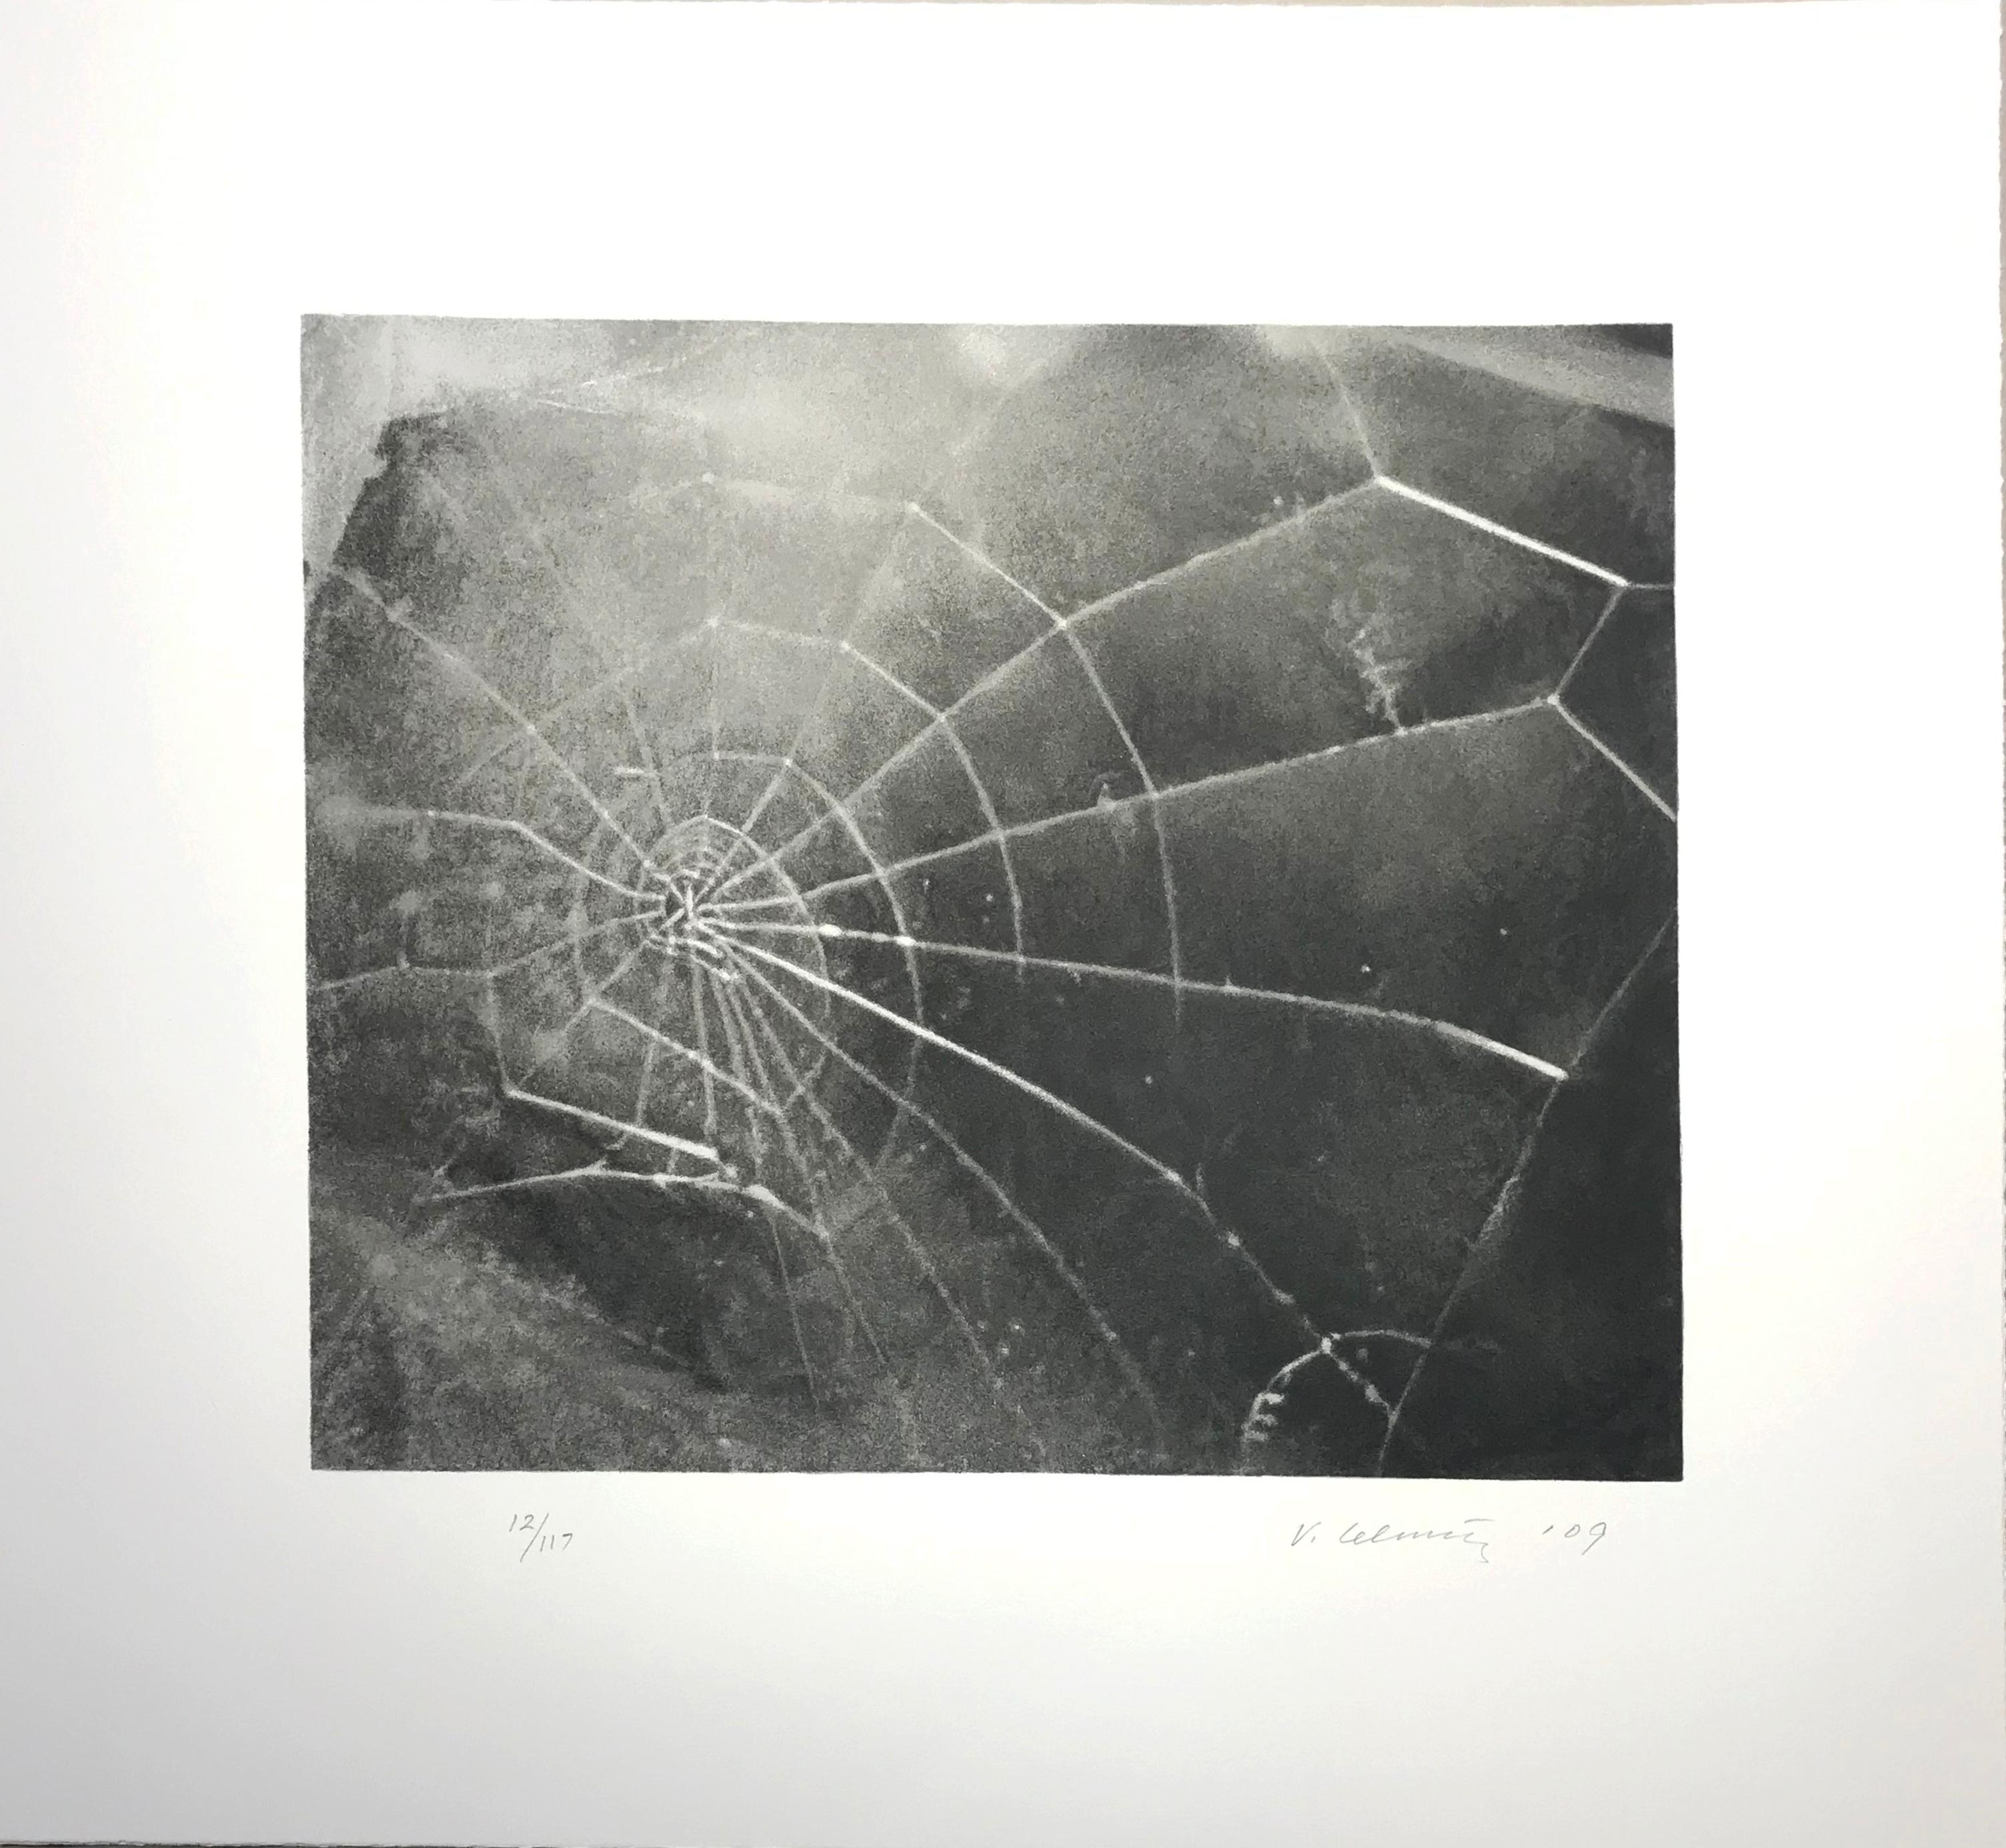 Vija Celmins 
Spider Web; 2009; Screenprint; 
17 1/2 x 19 inches; Edition of 117
"Spider Web" by Vija Celmins was commissioned as part of Lincoln Center's 50th Anniversary celebration. Ms. Celmins recently received an award from the International